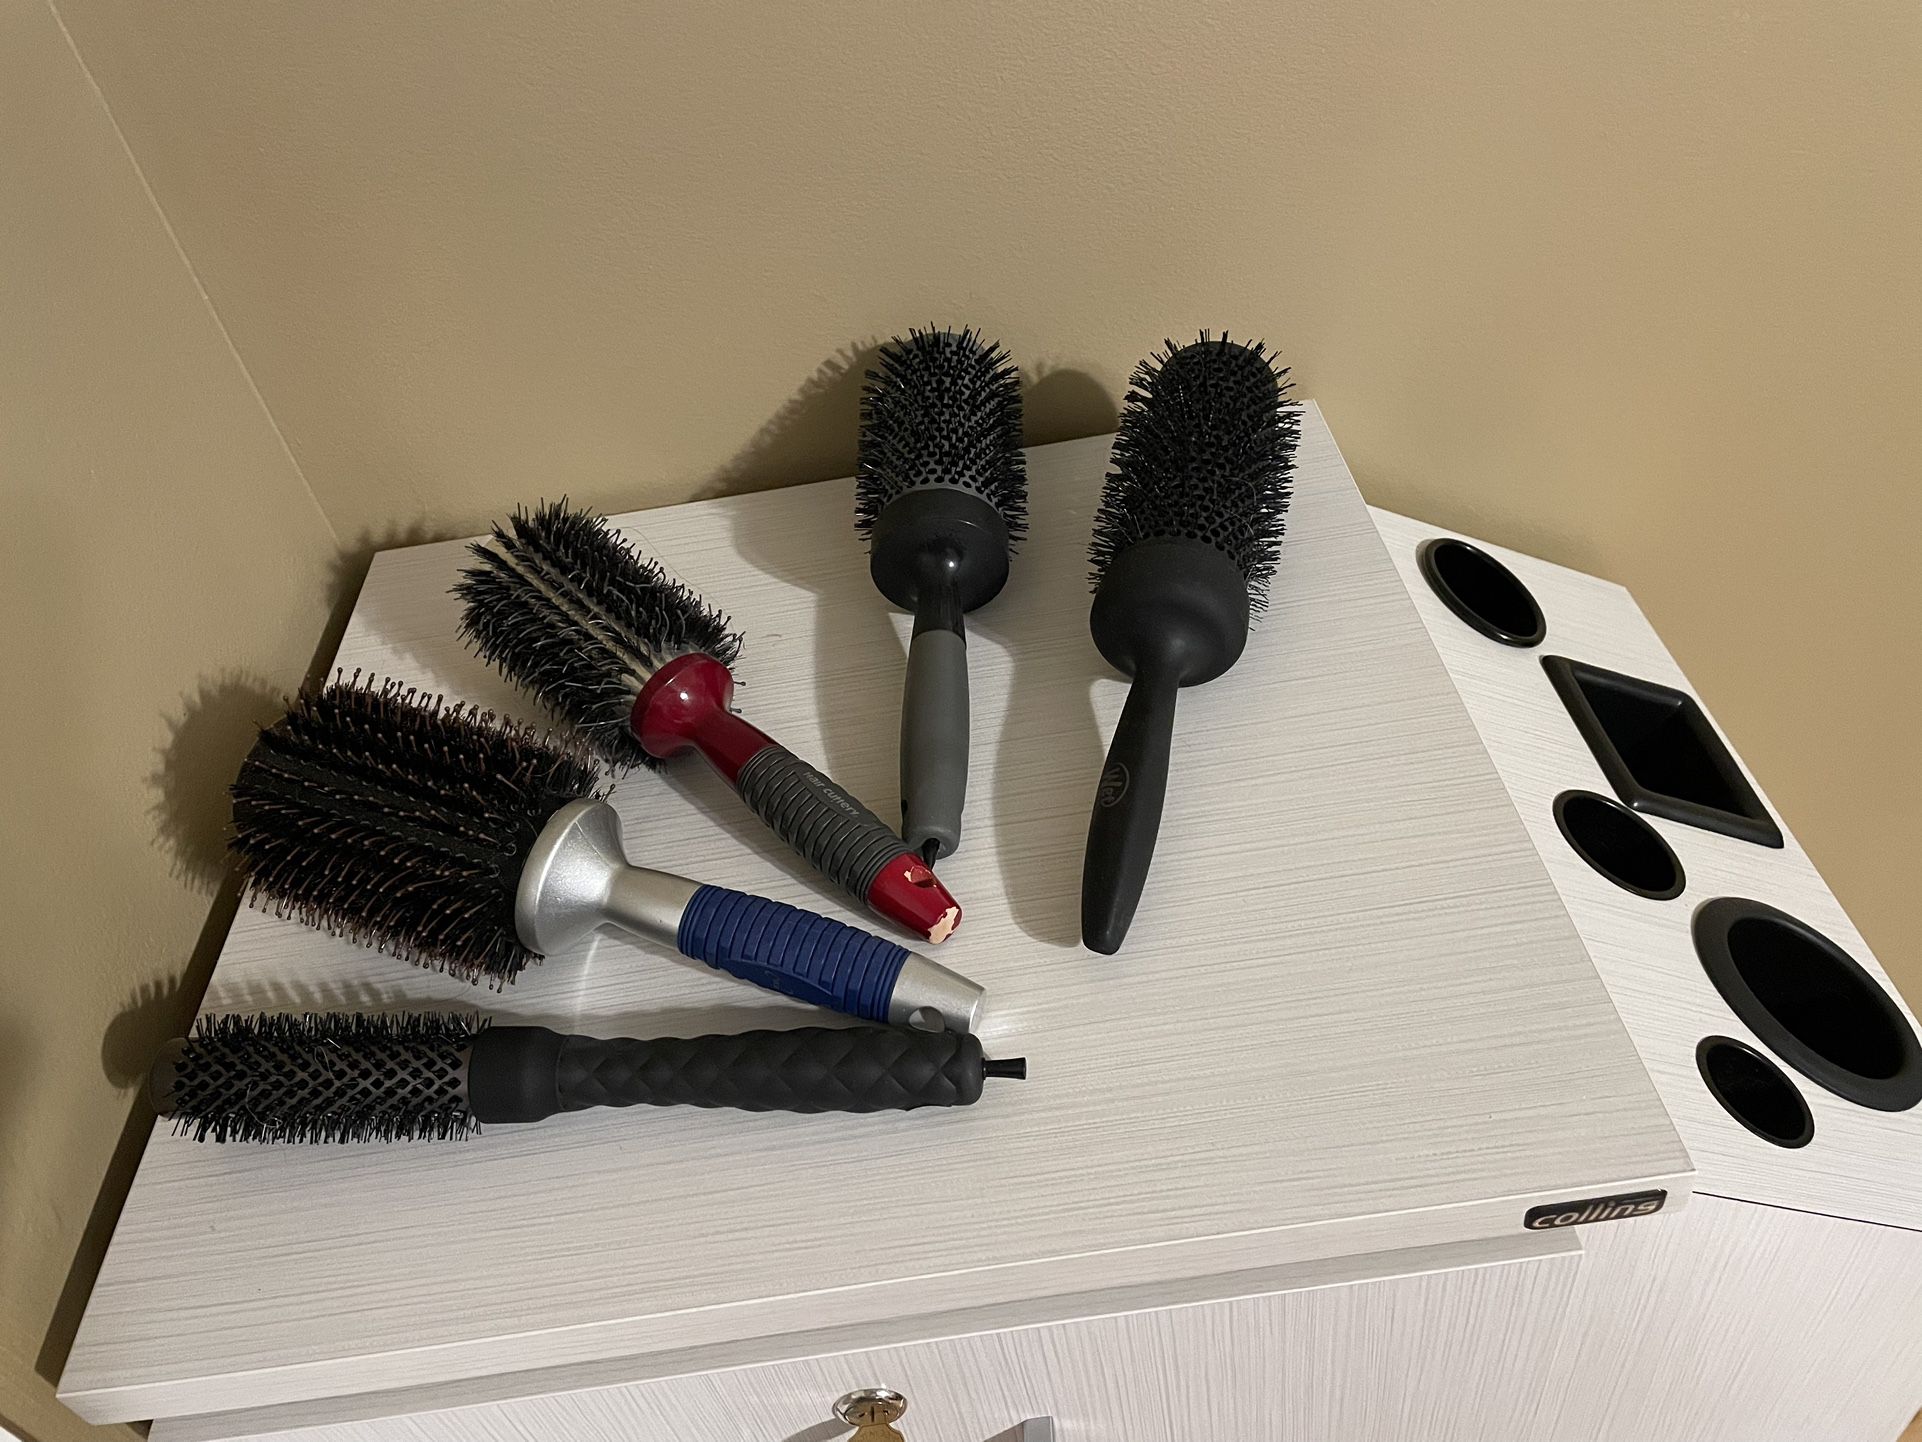 Professional Hair Brushes